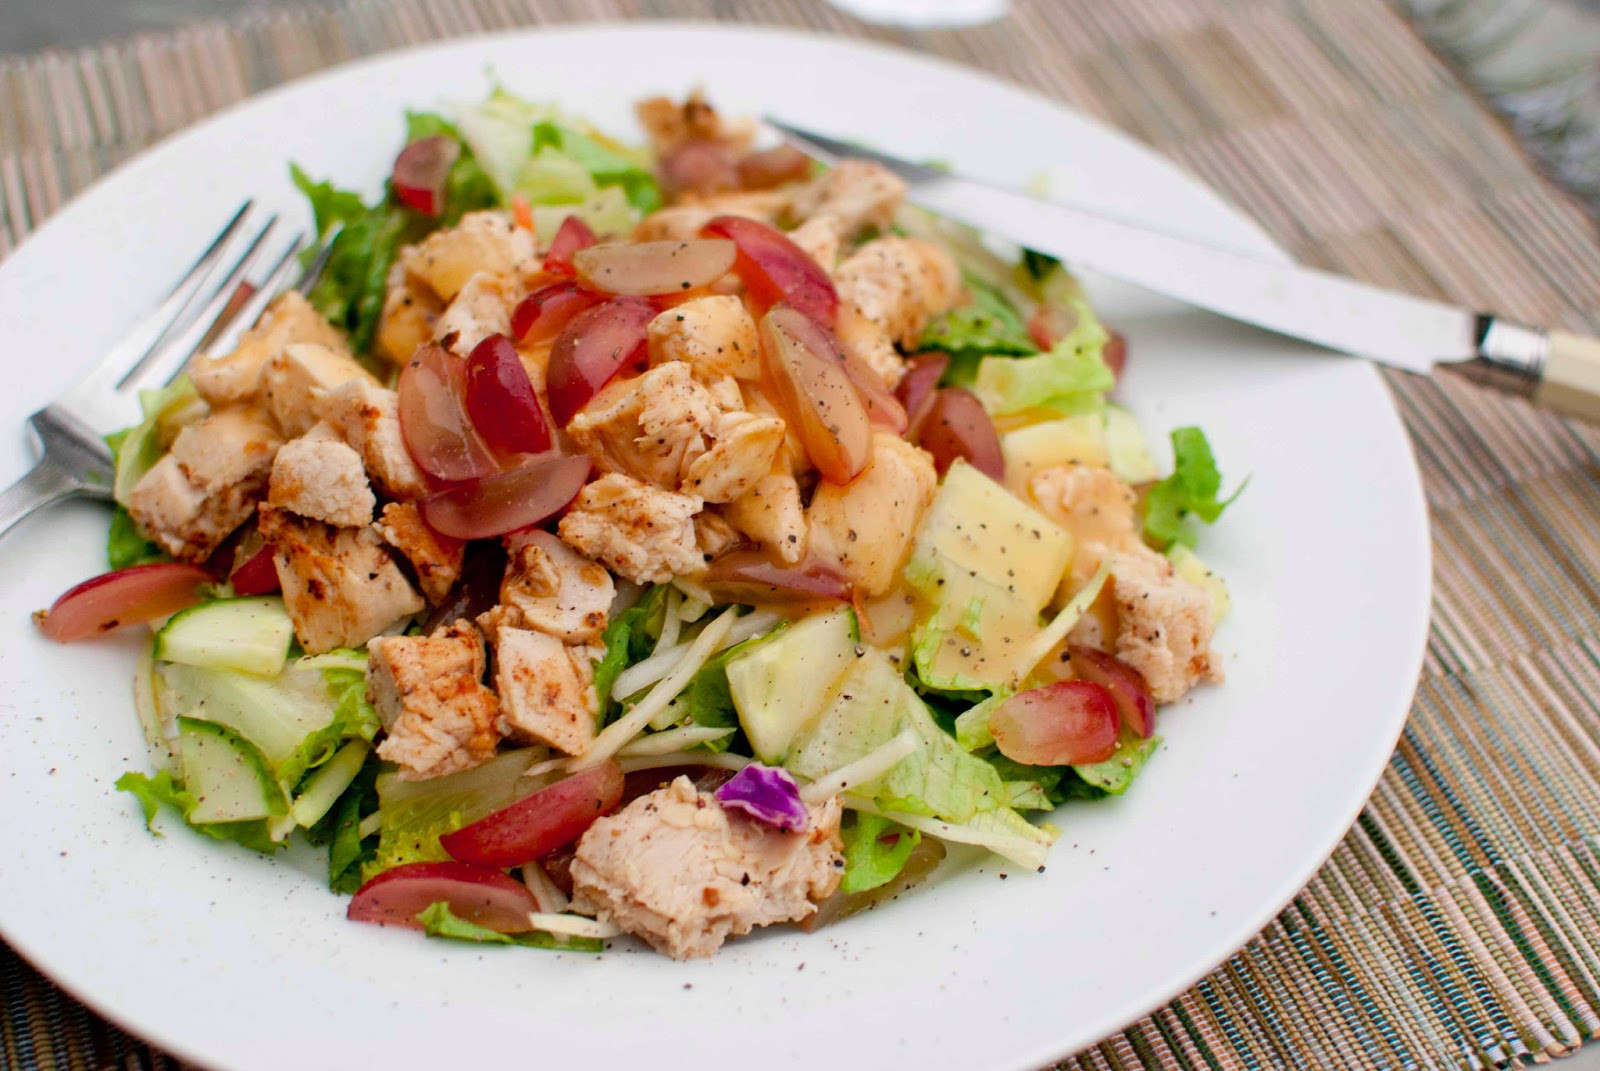 Paleo Chicken Salad
 Easy Paleo Chicken Salad from Sweetpea Lifestyle Andrea Bai